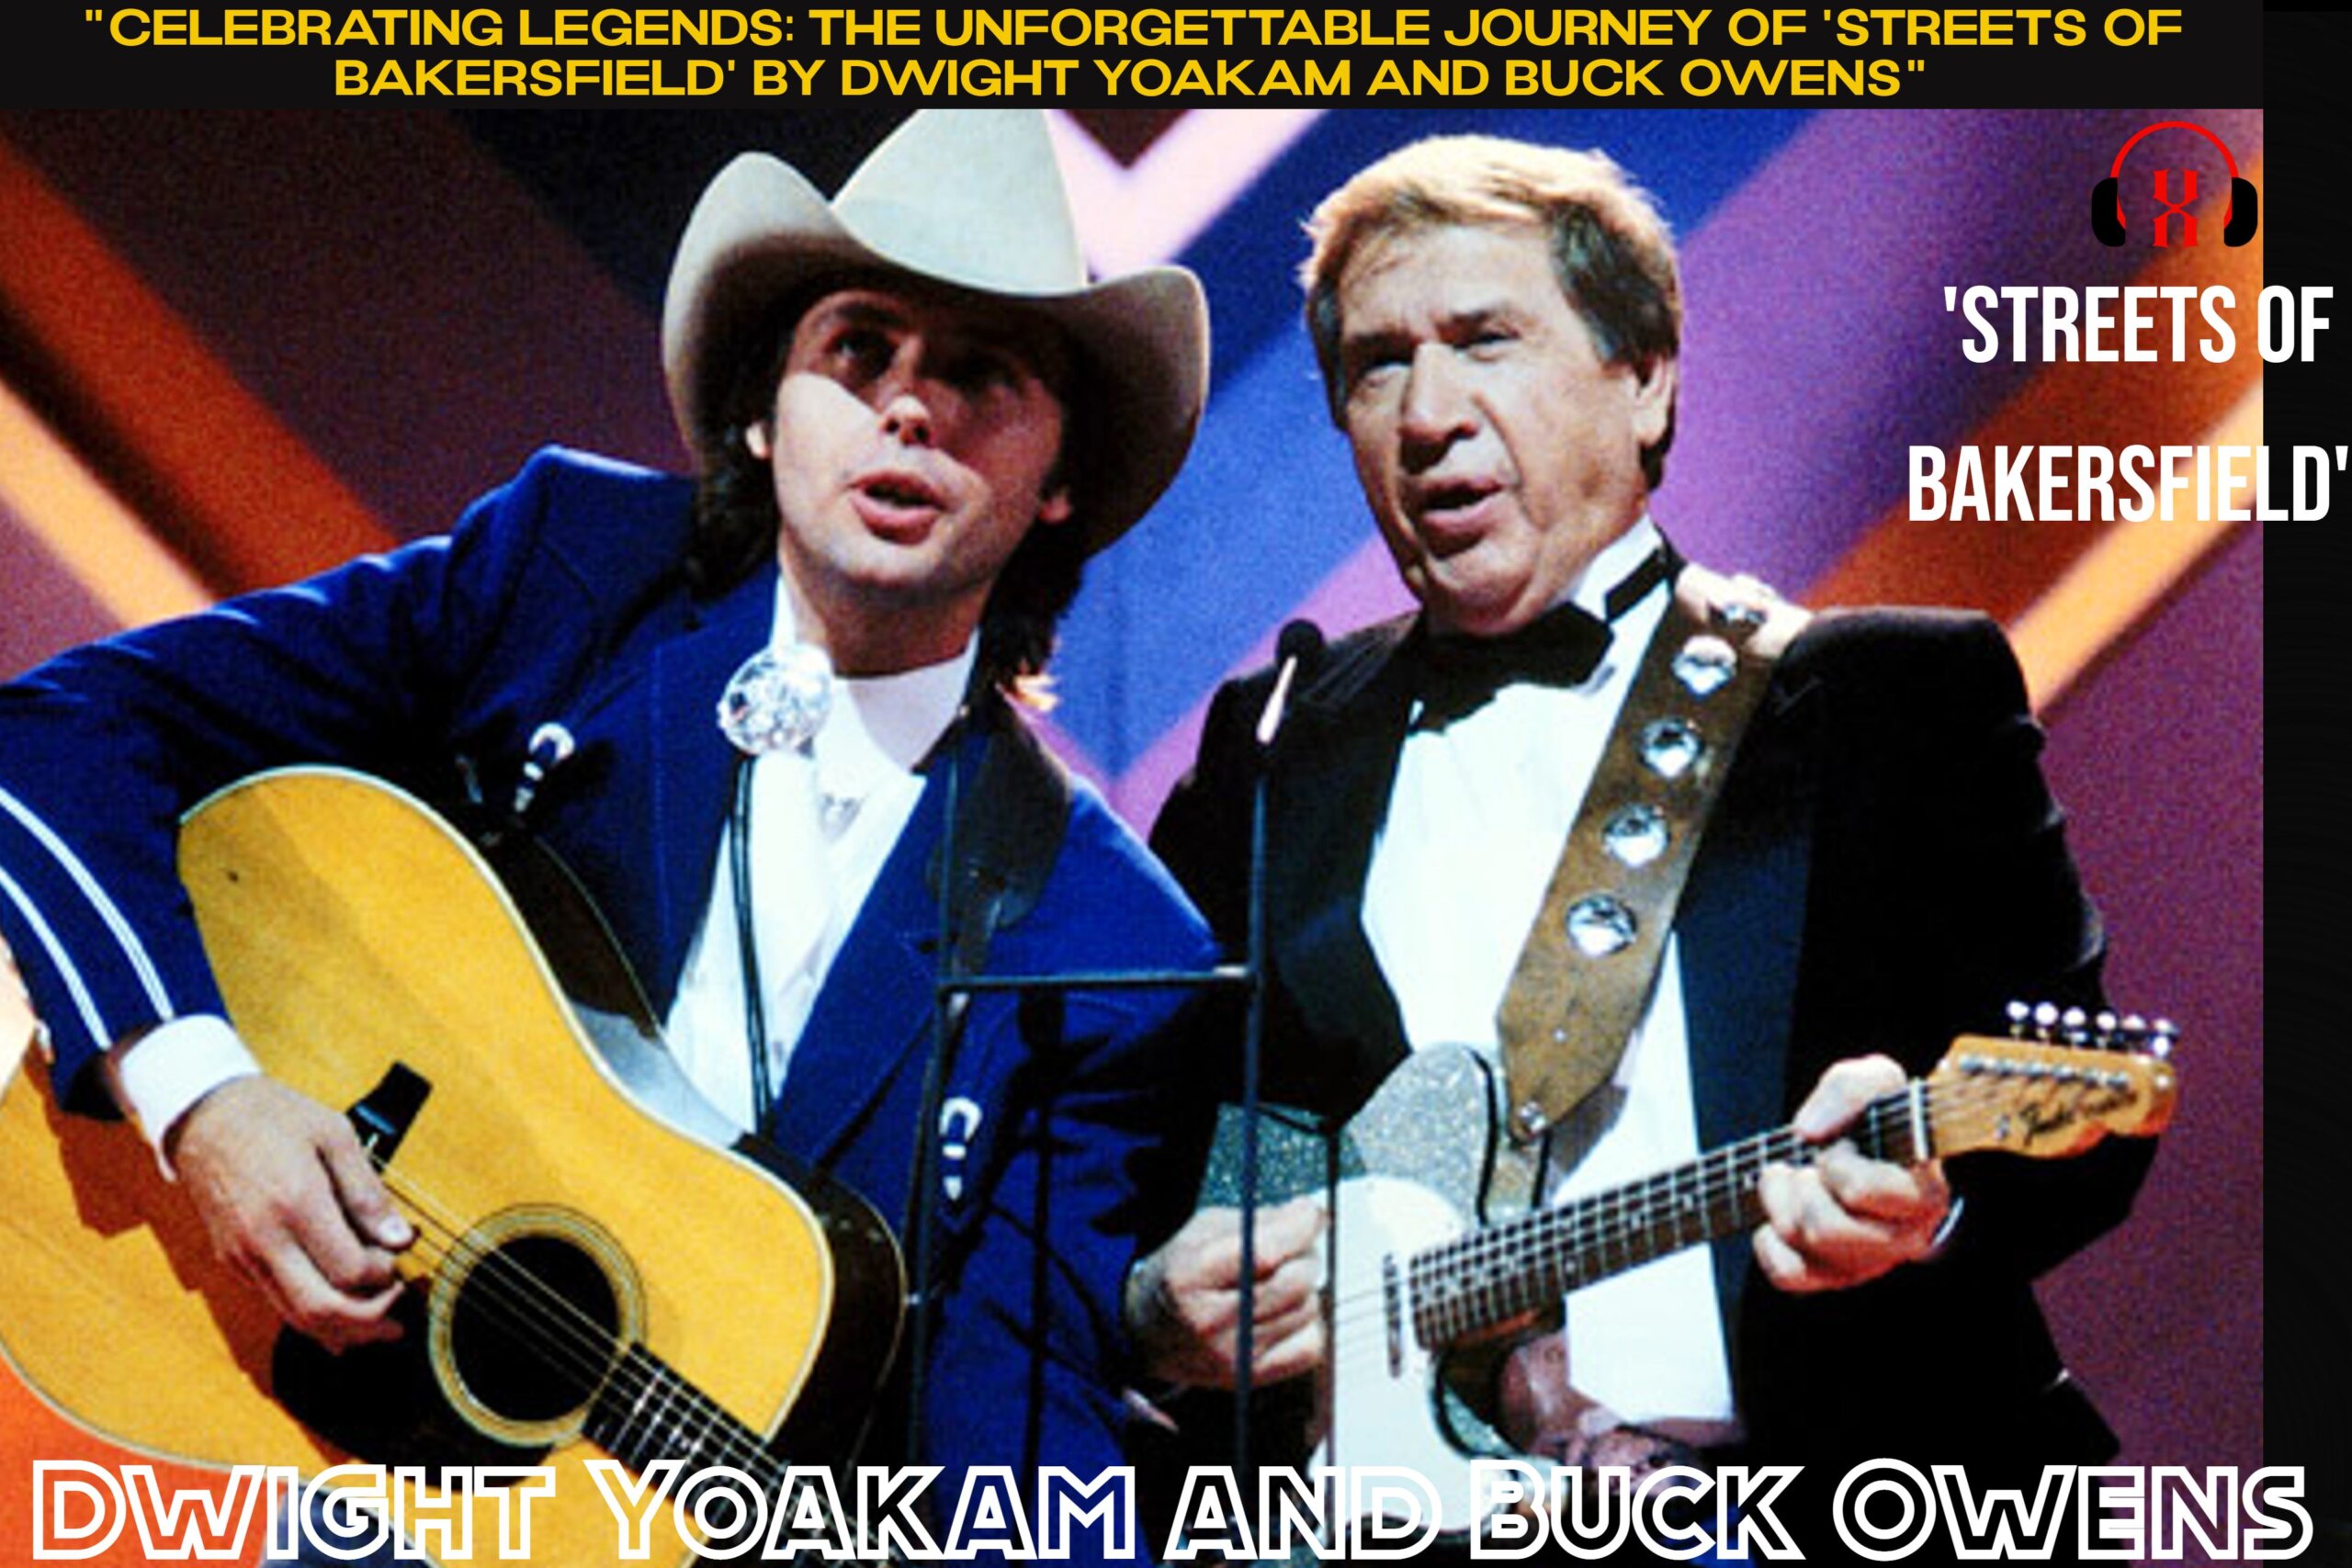 'Streets Of Bakersfield' by Dwight Yoakam and Buck Owens"